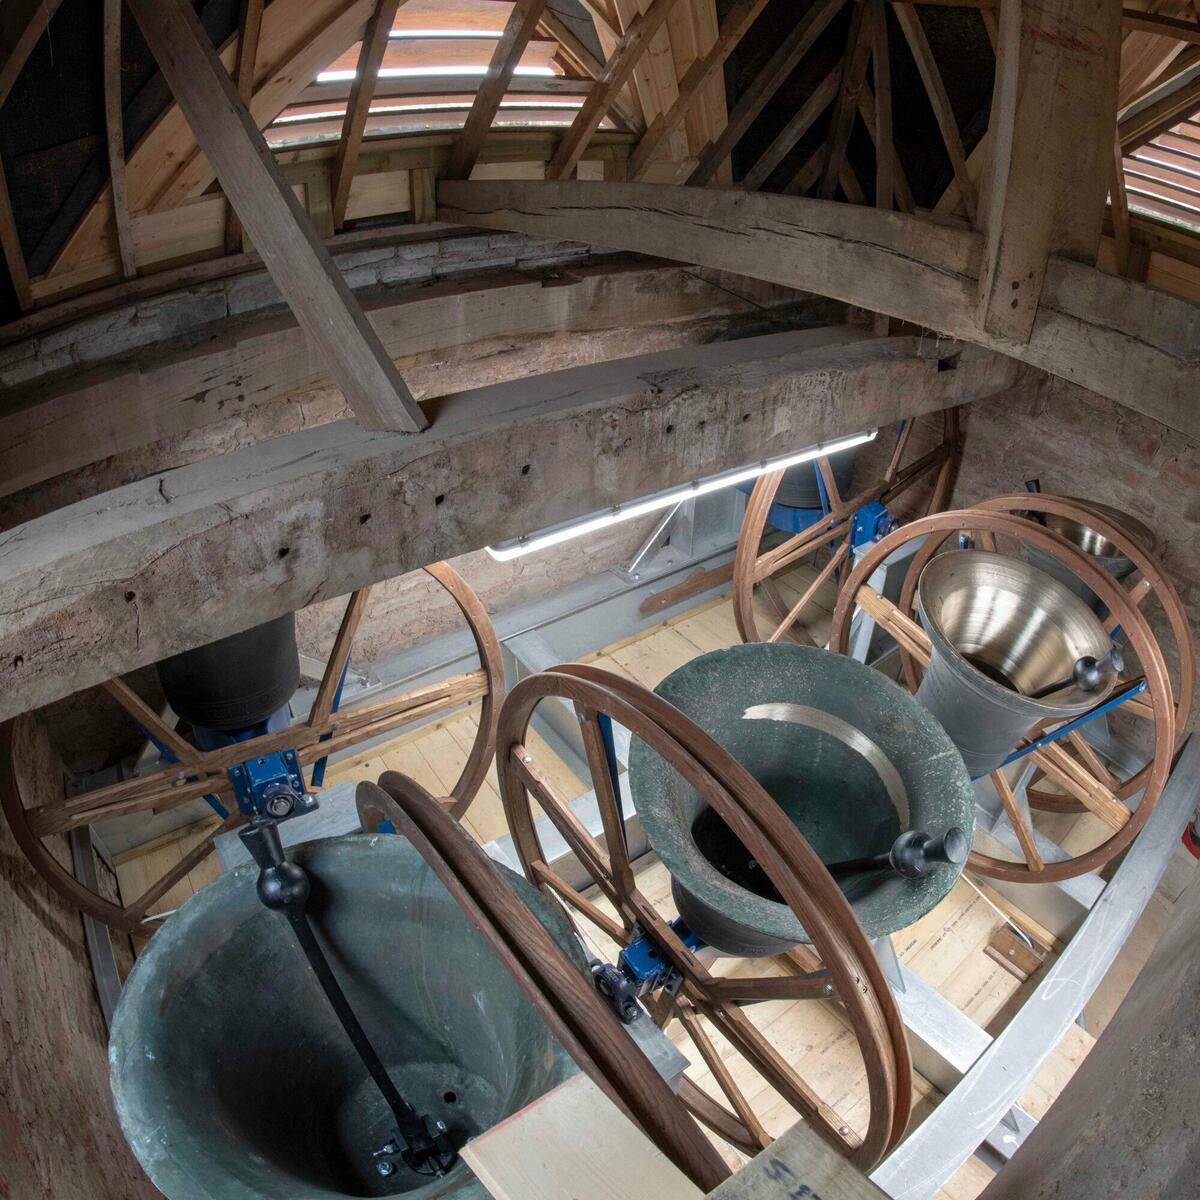 6 Bells - visiting ringers welcome